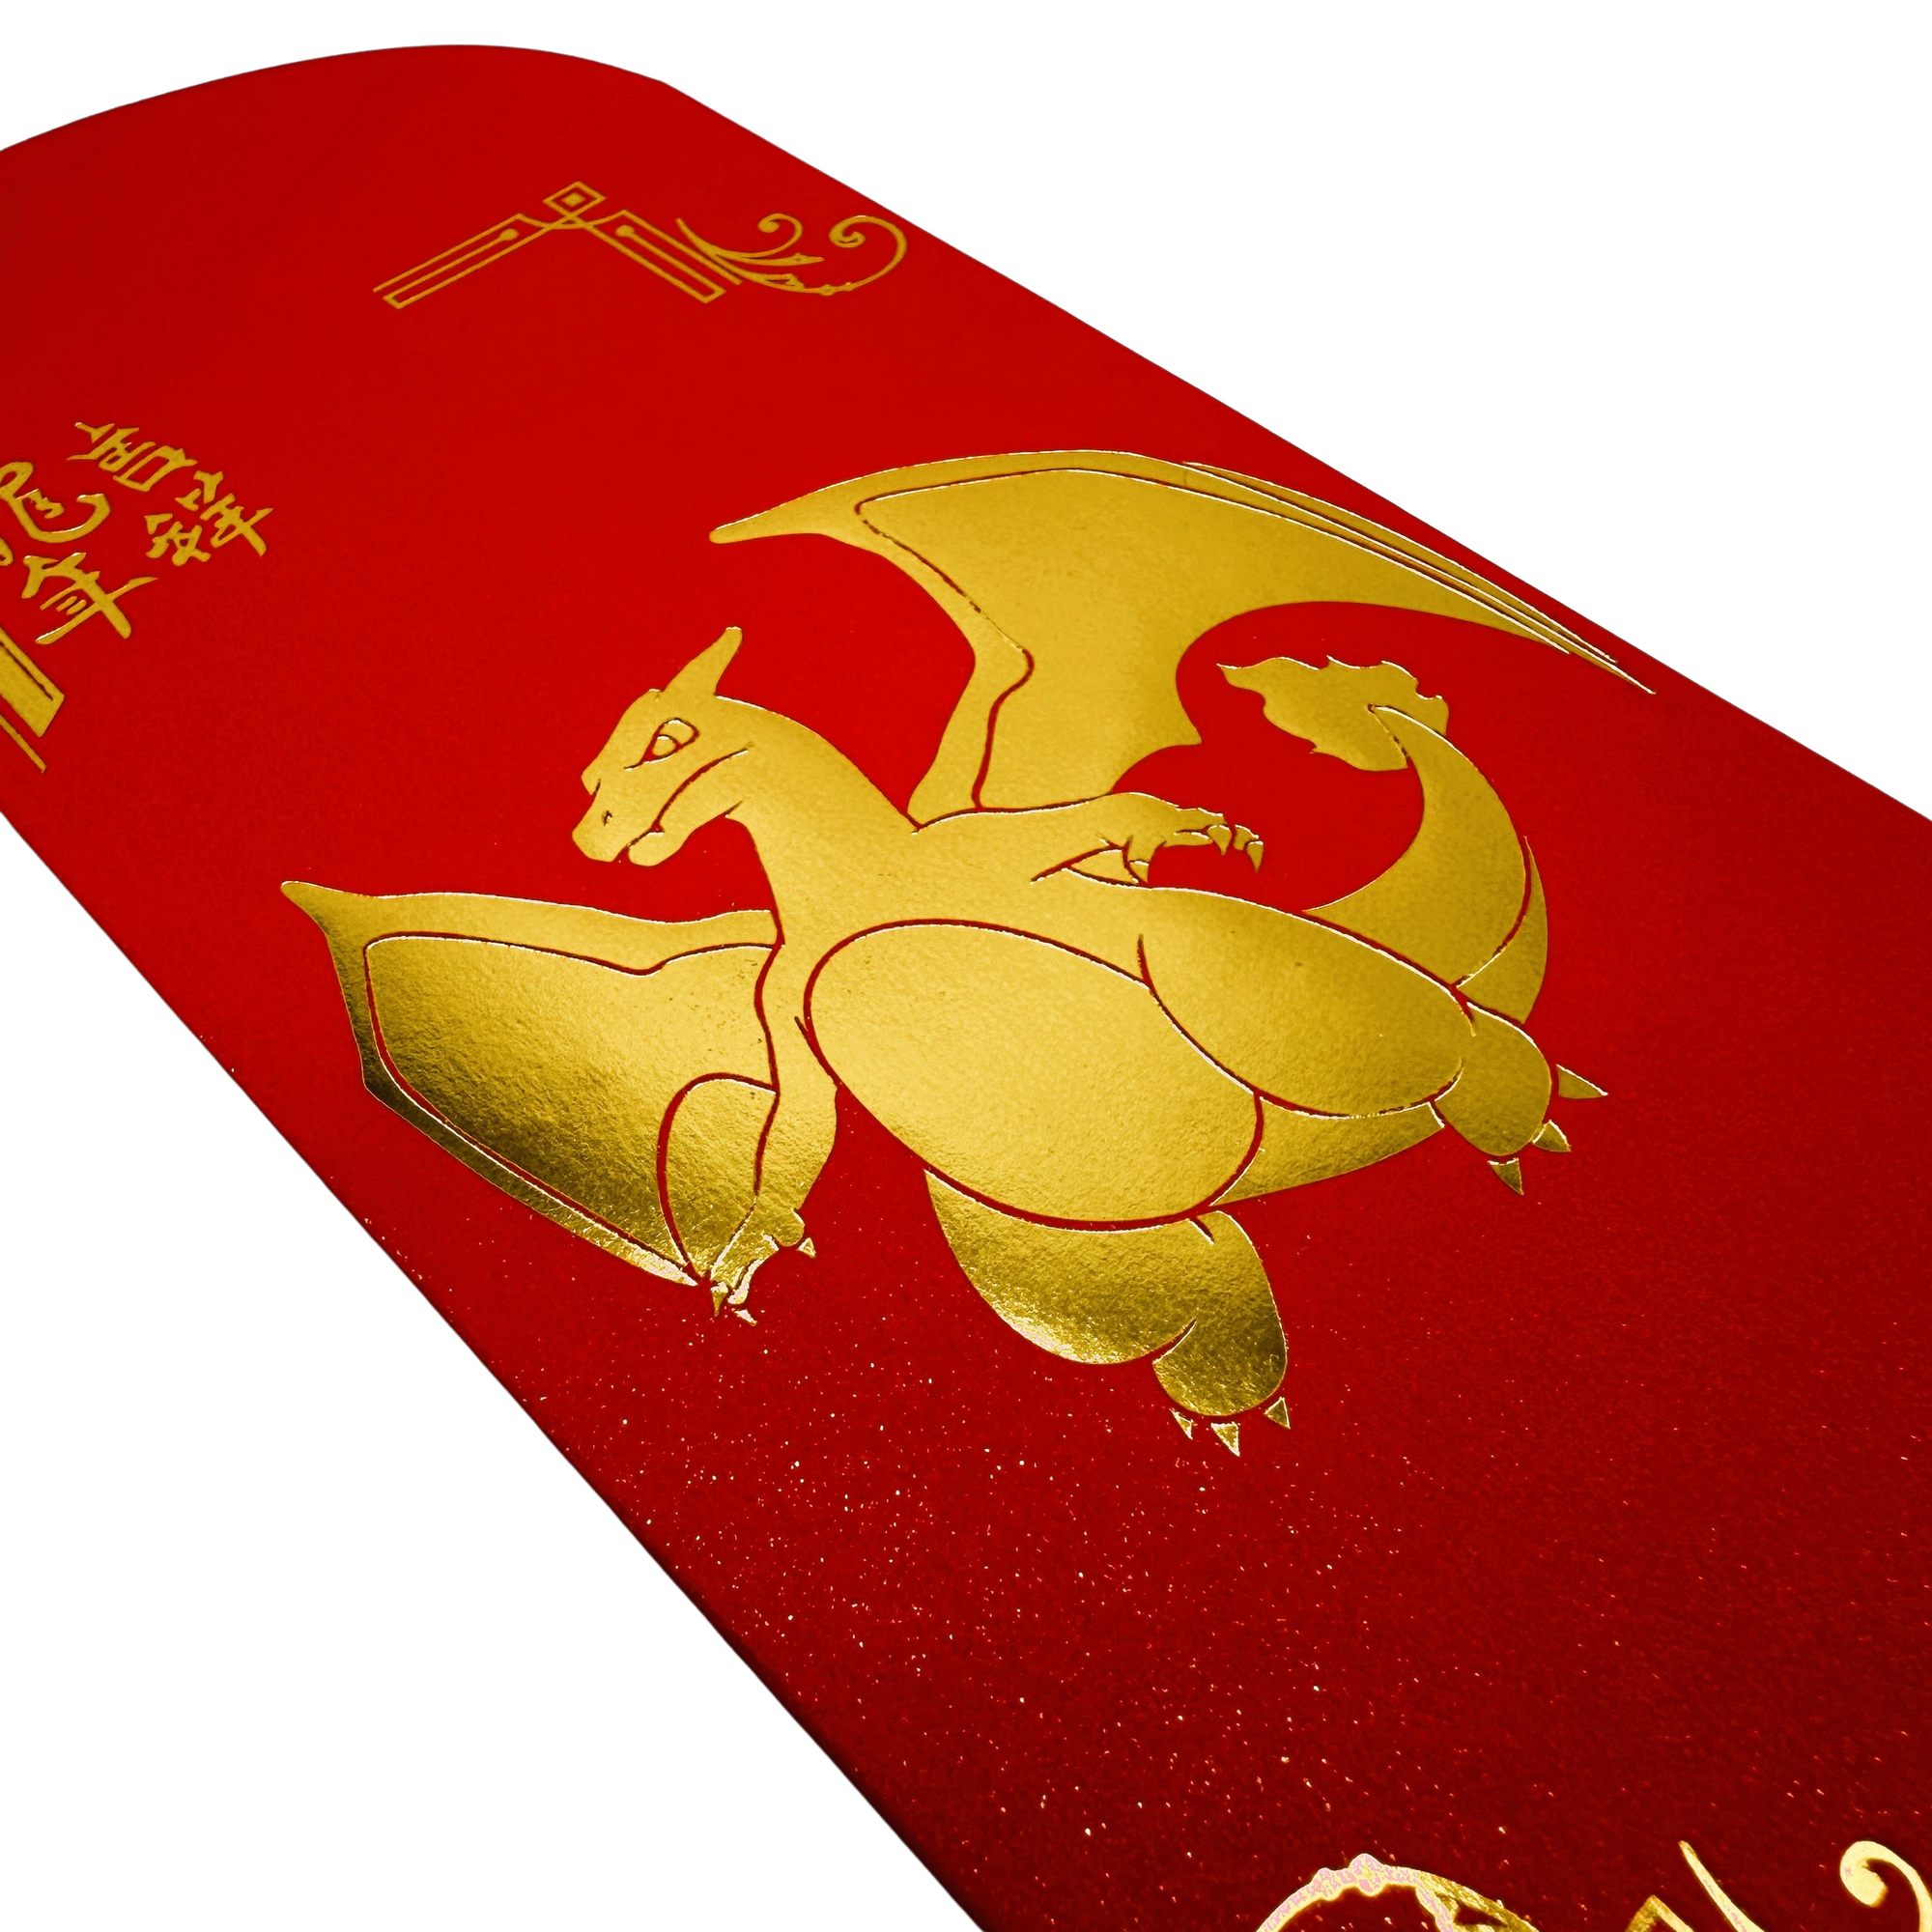 Charizard Lunar New Year Red Envelope